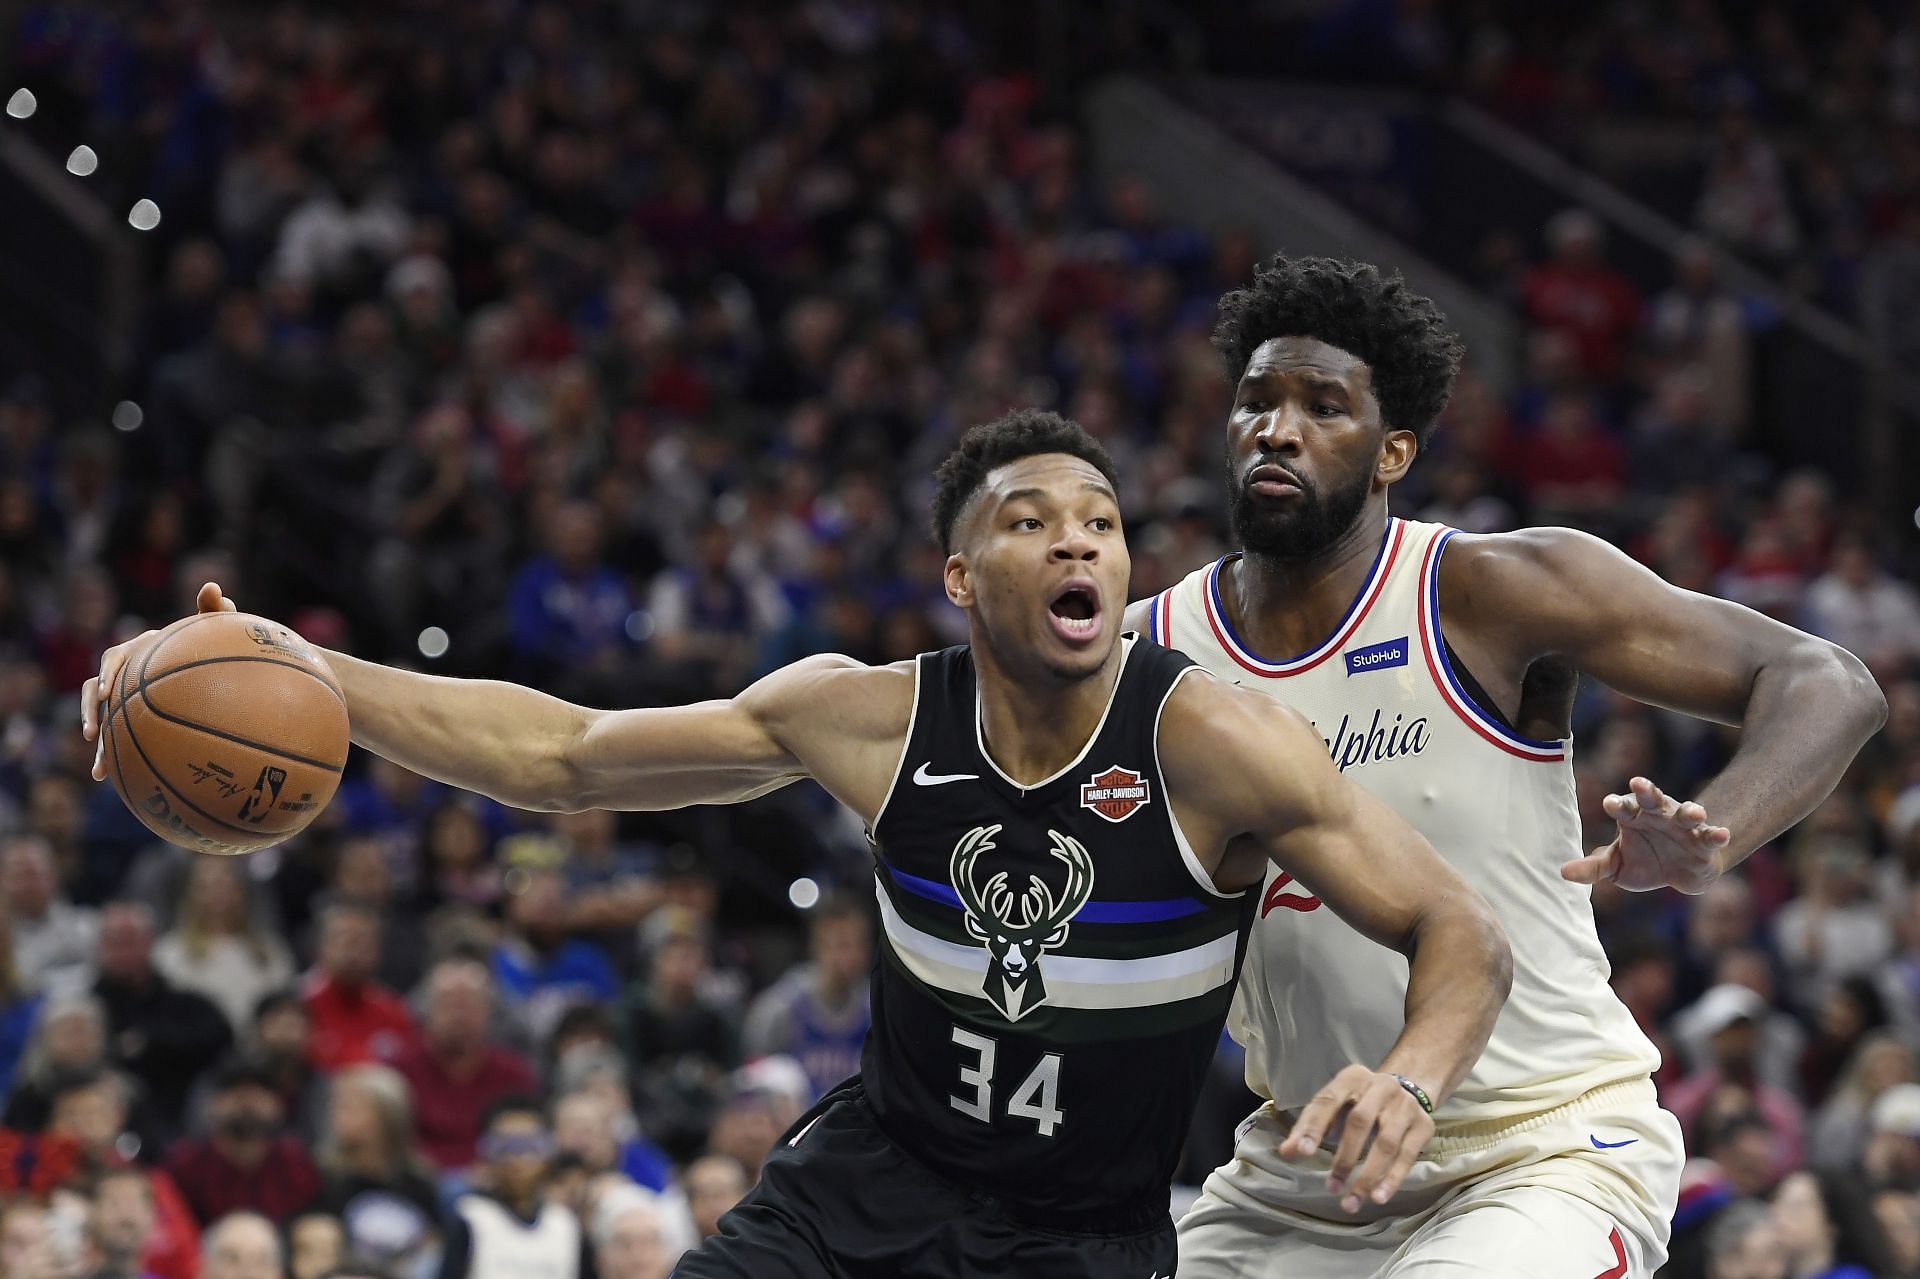 The depleted Philadelphia 76ers will have their hands full against Giannis Antetokounmpo and the Milwaukee Bucks